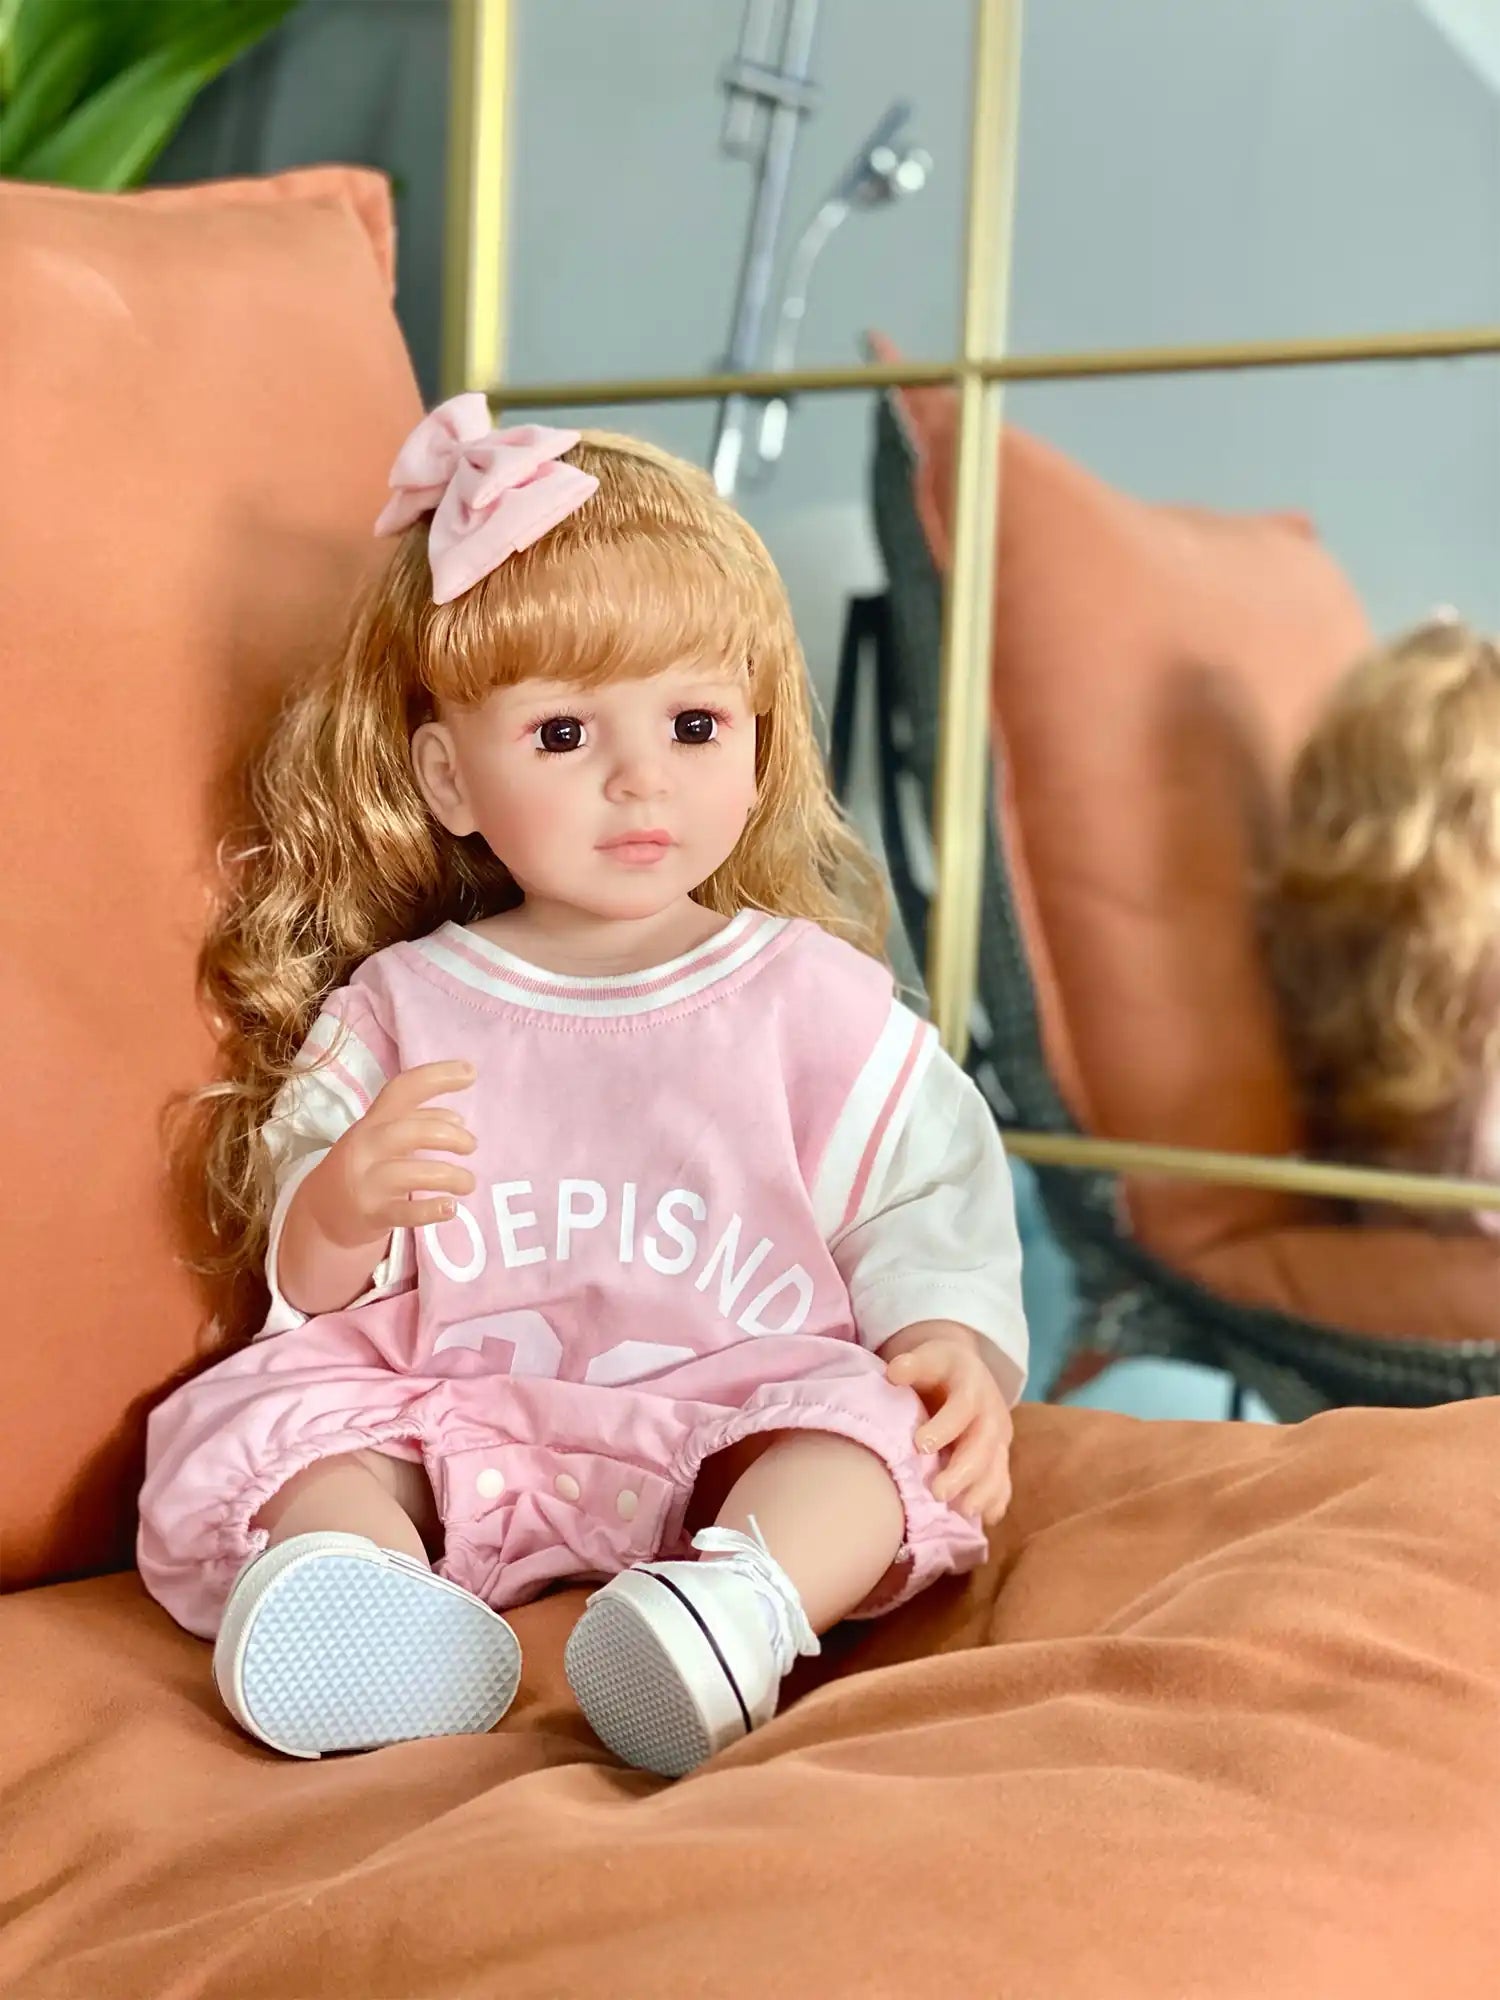 A strawberry blonde-haired doll with a pink bow, seated comfortably, wearing a pink jersey, shorts, and white sneakers.